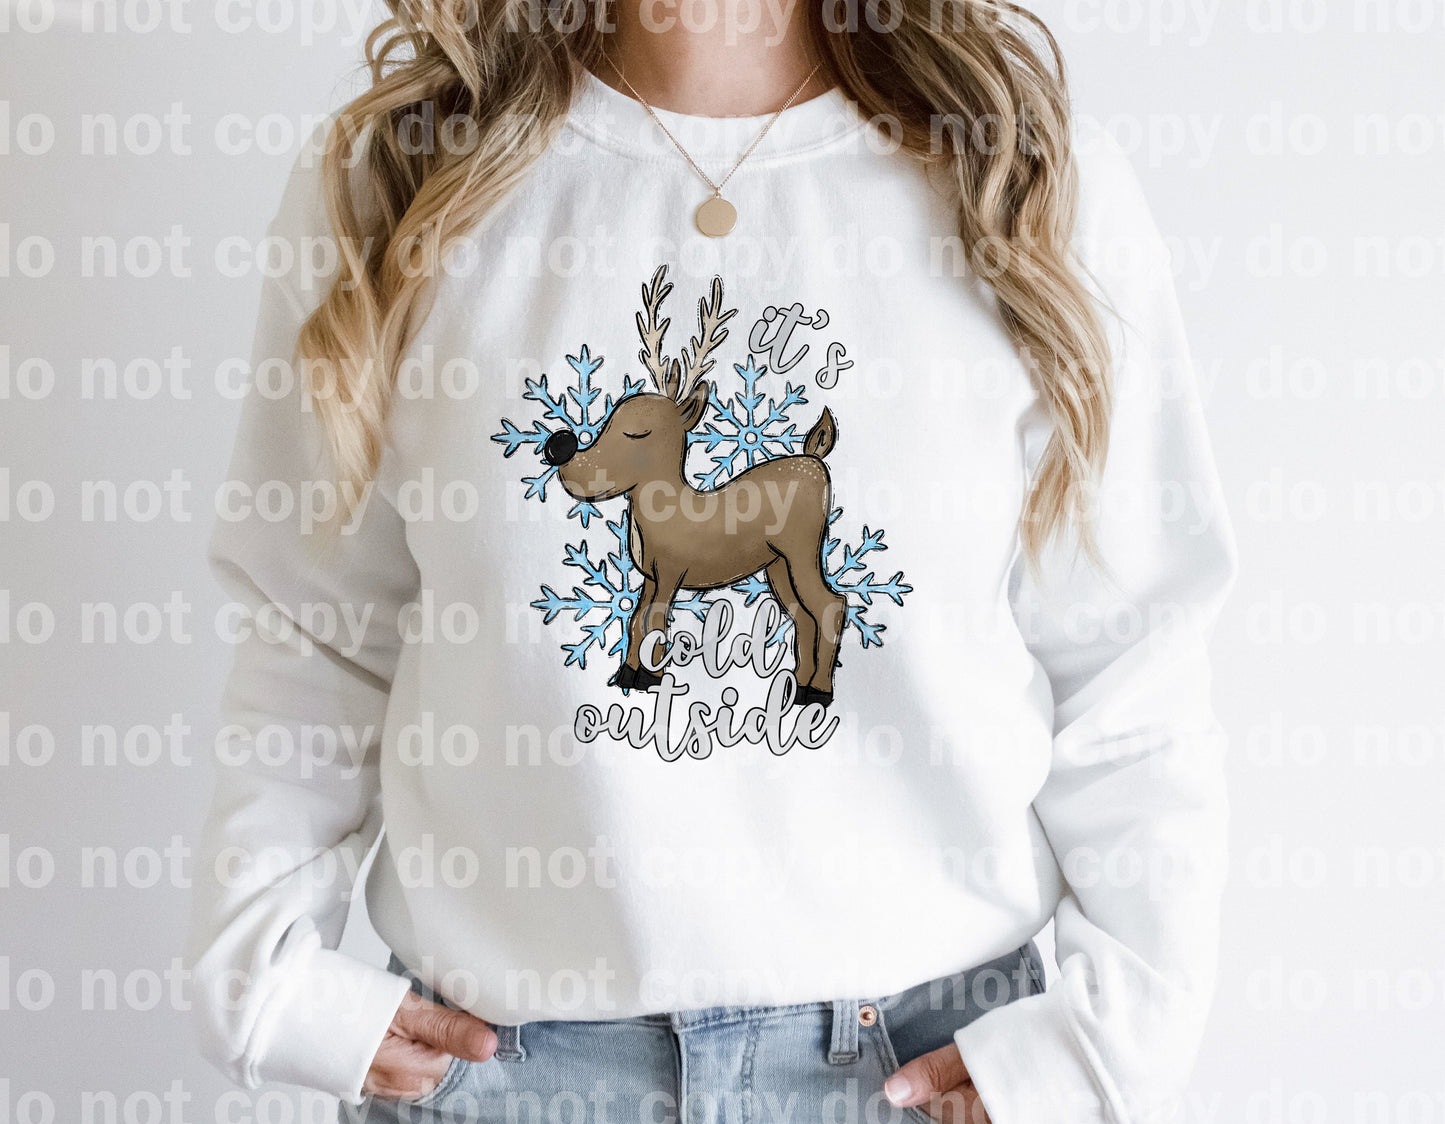 It's Cold Outside Dream Print or Sublimation Print